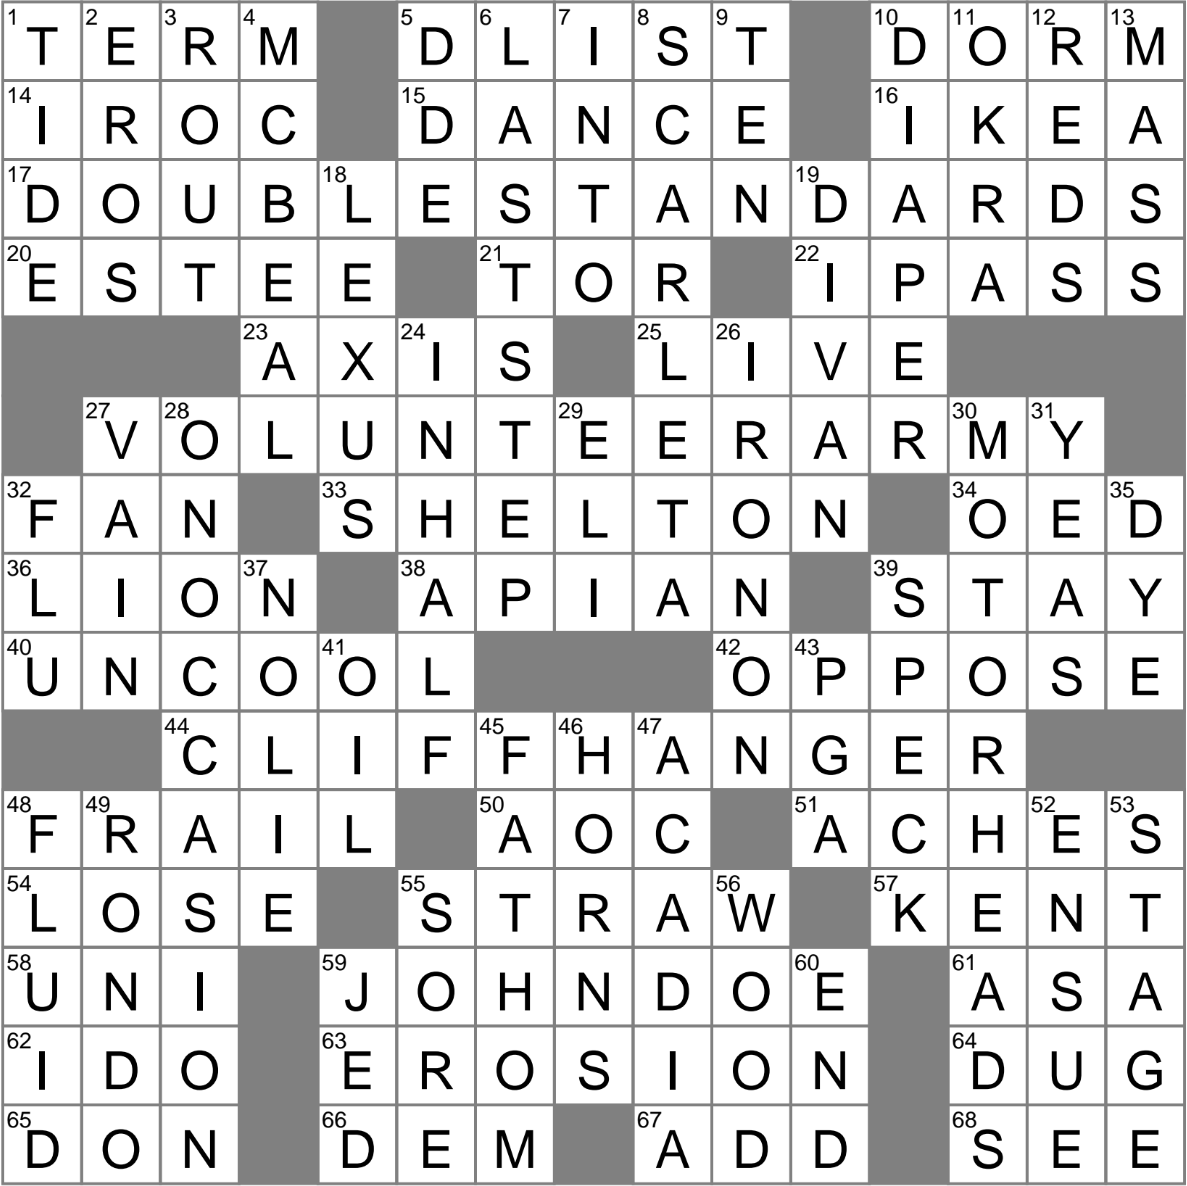 Car enthusiasts slangily crossword clue Archives - LAXCrossword.com